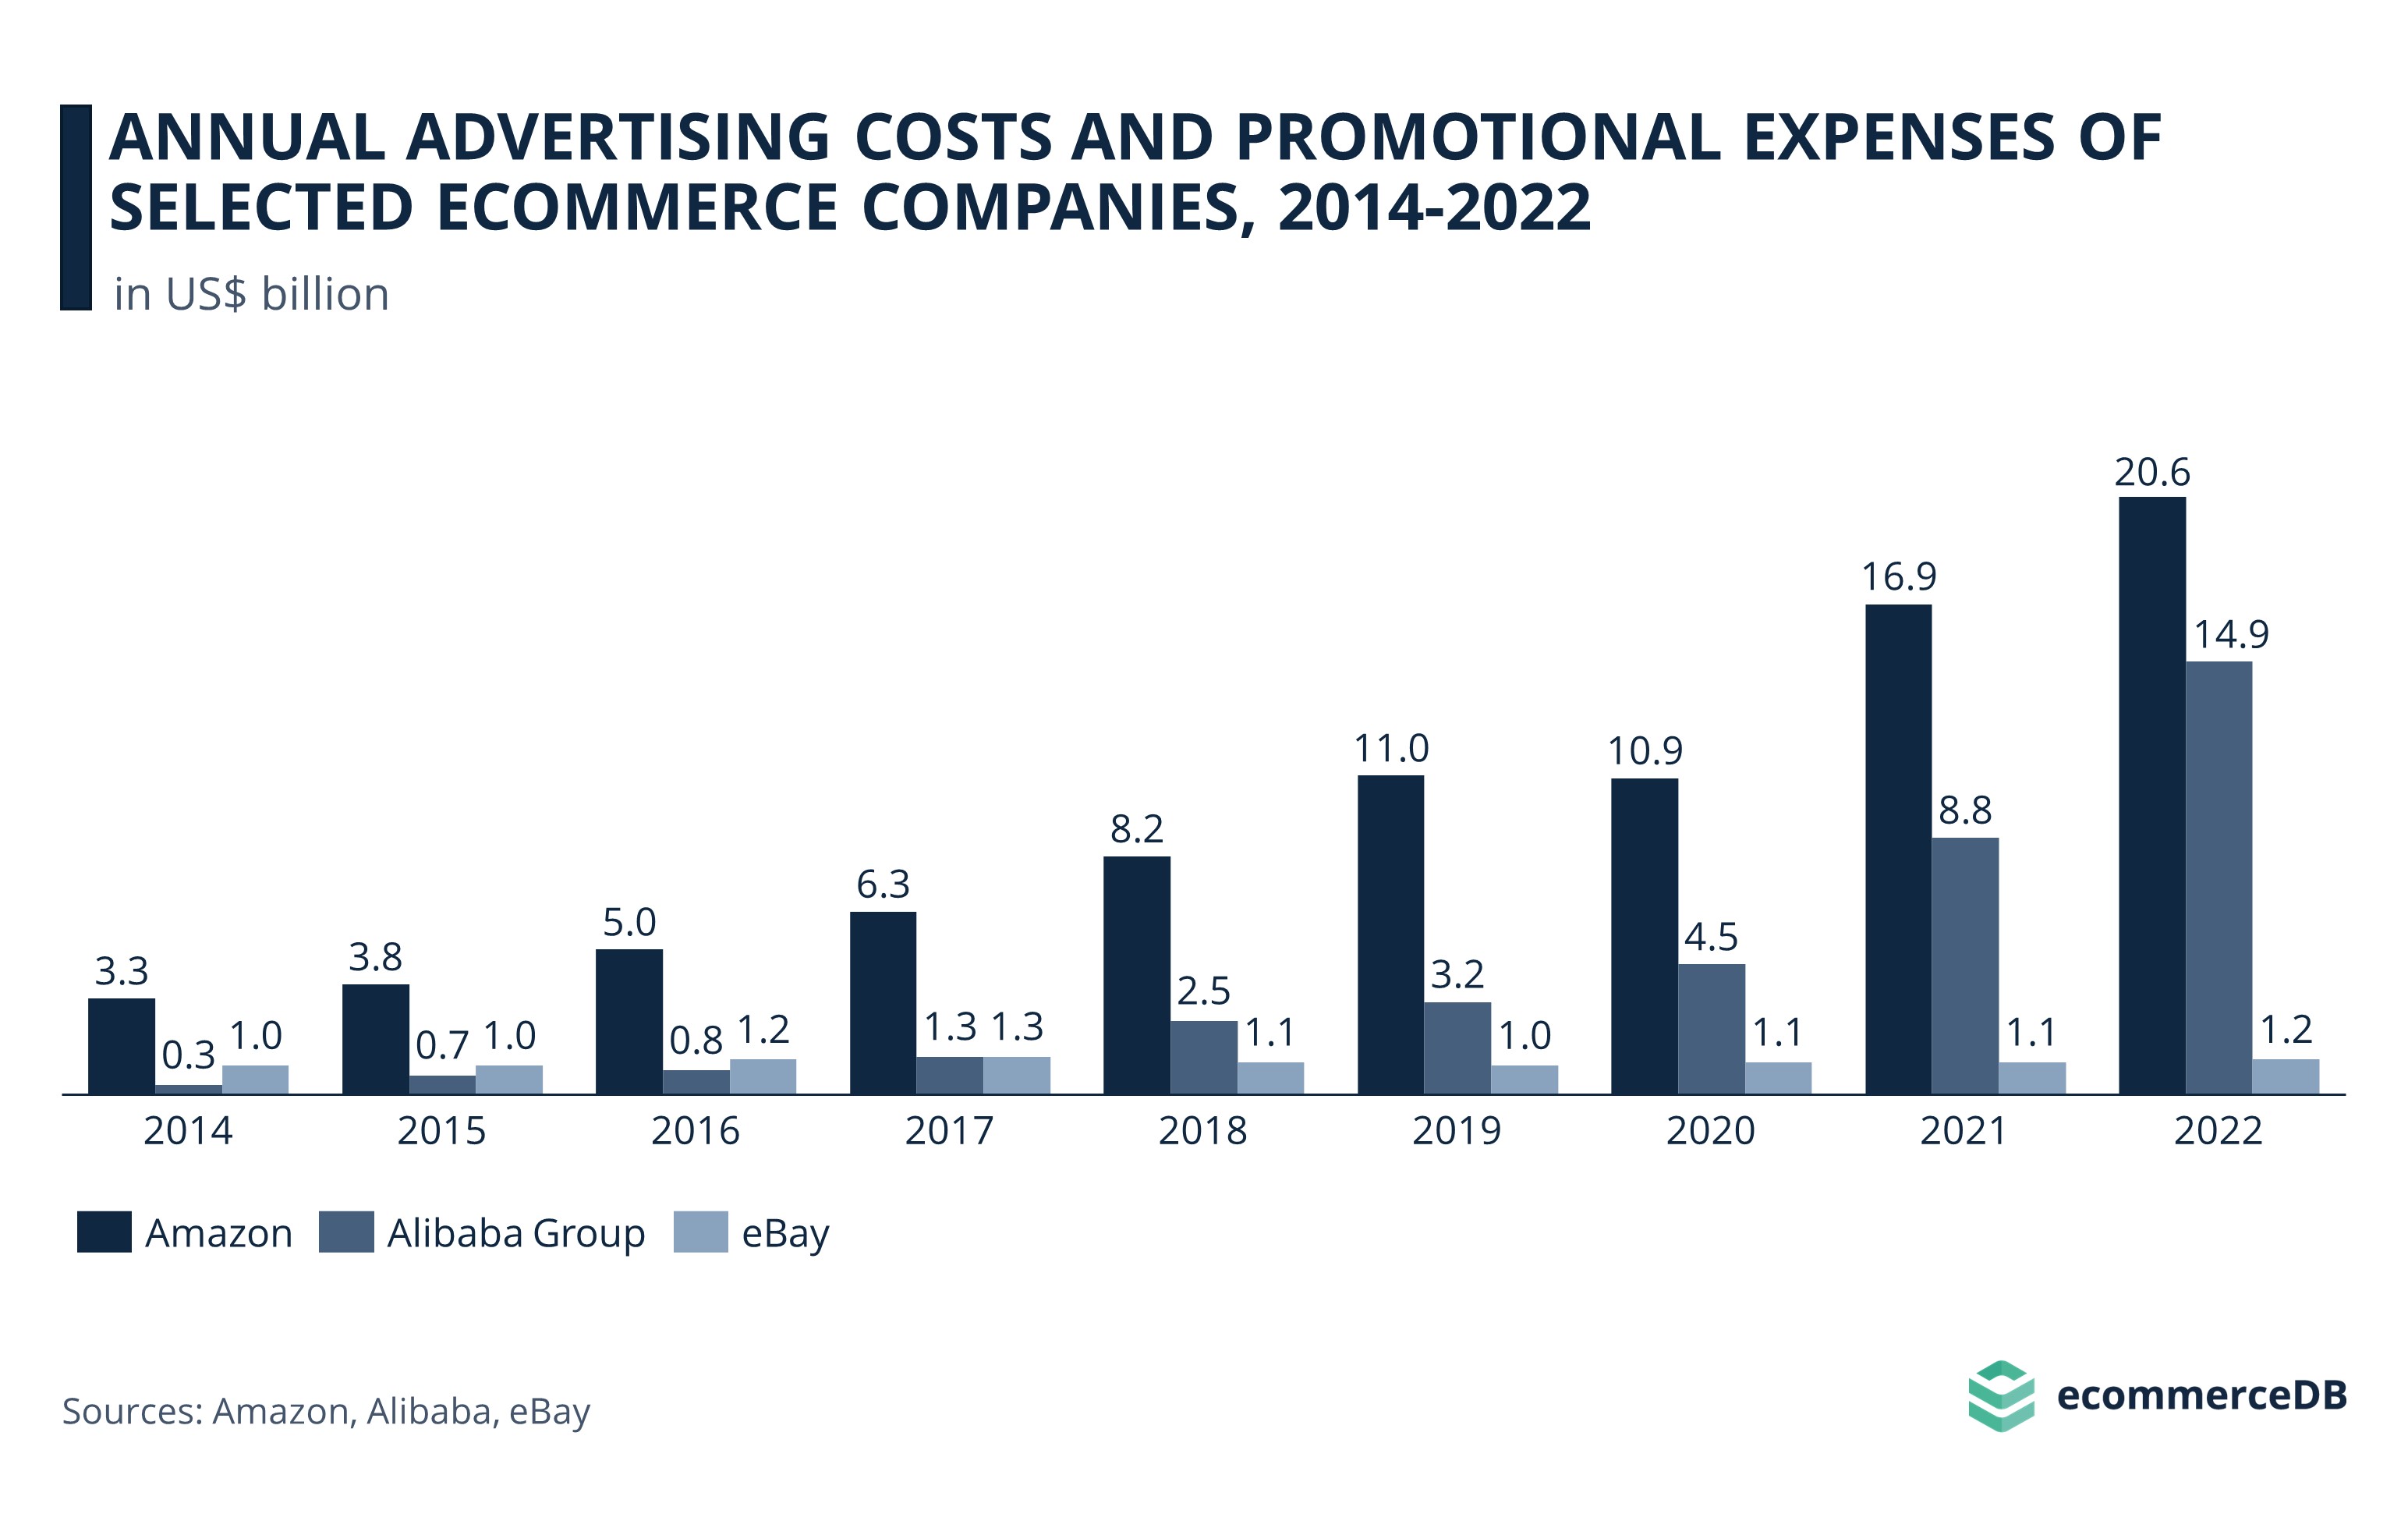 Annual Advertising Costs and Promotional Expenses of Selected eCommerce Companies, 2014-2022